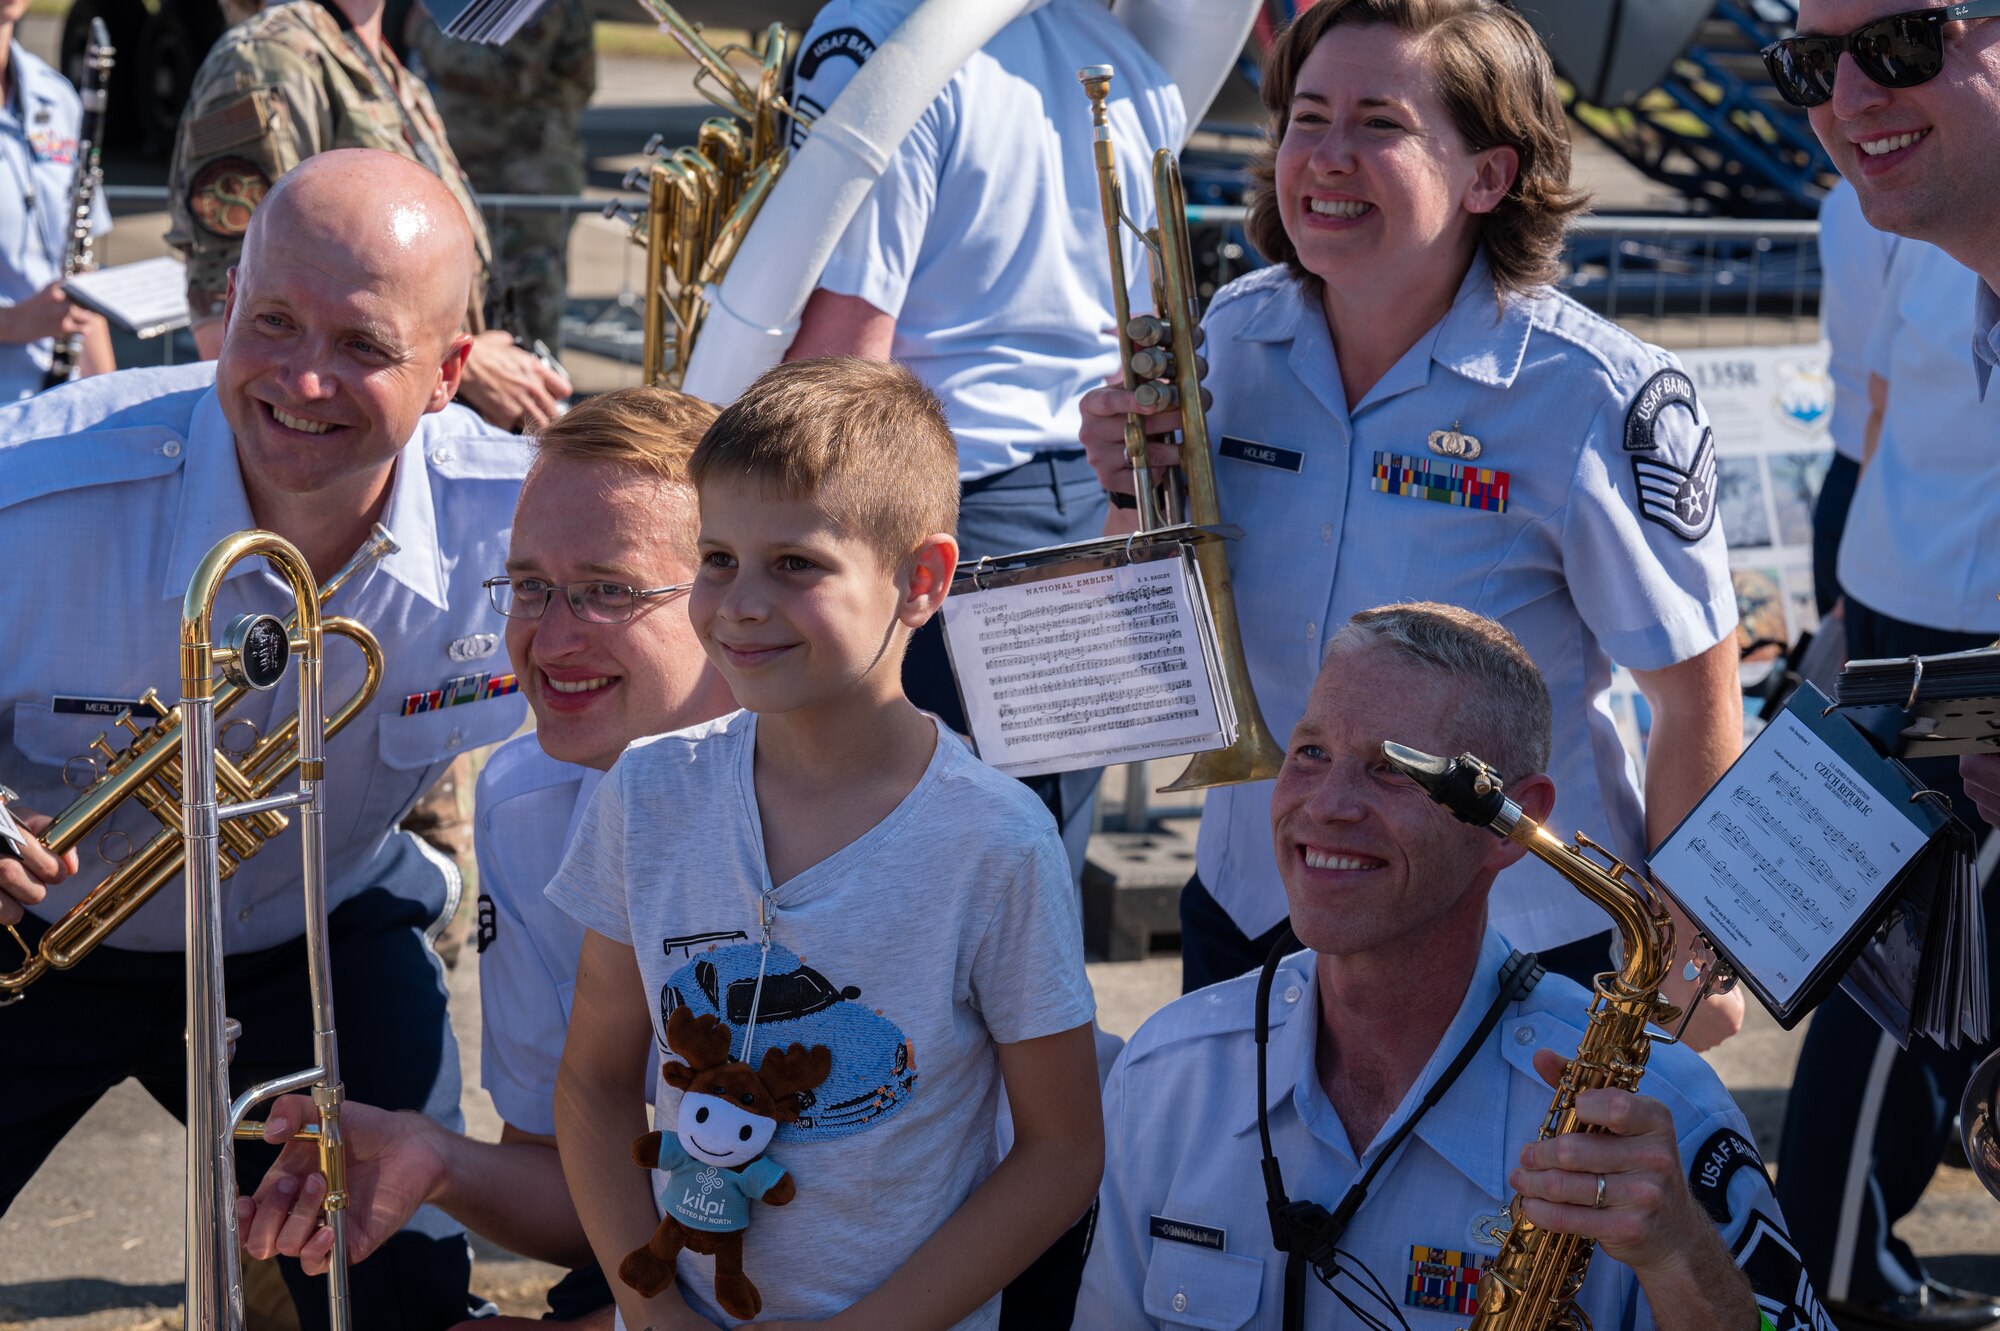 U.S. Air Force Airmen assigned to the U.S. Air Forces in Europe Ceremonial Band, pose for a photo with a Czech boy after their performance during the NATO Days event at Leoš Janáček Airport in Ostrava, Czech Republic, Sept. 16, 2023.